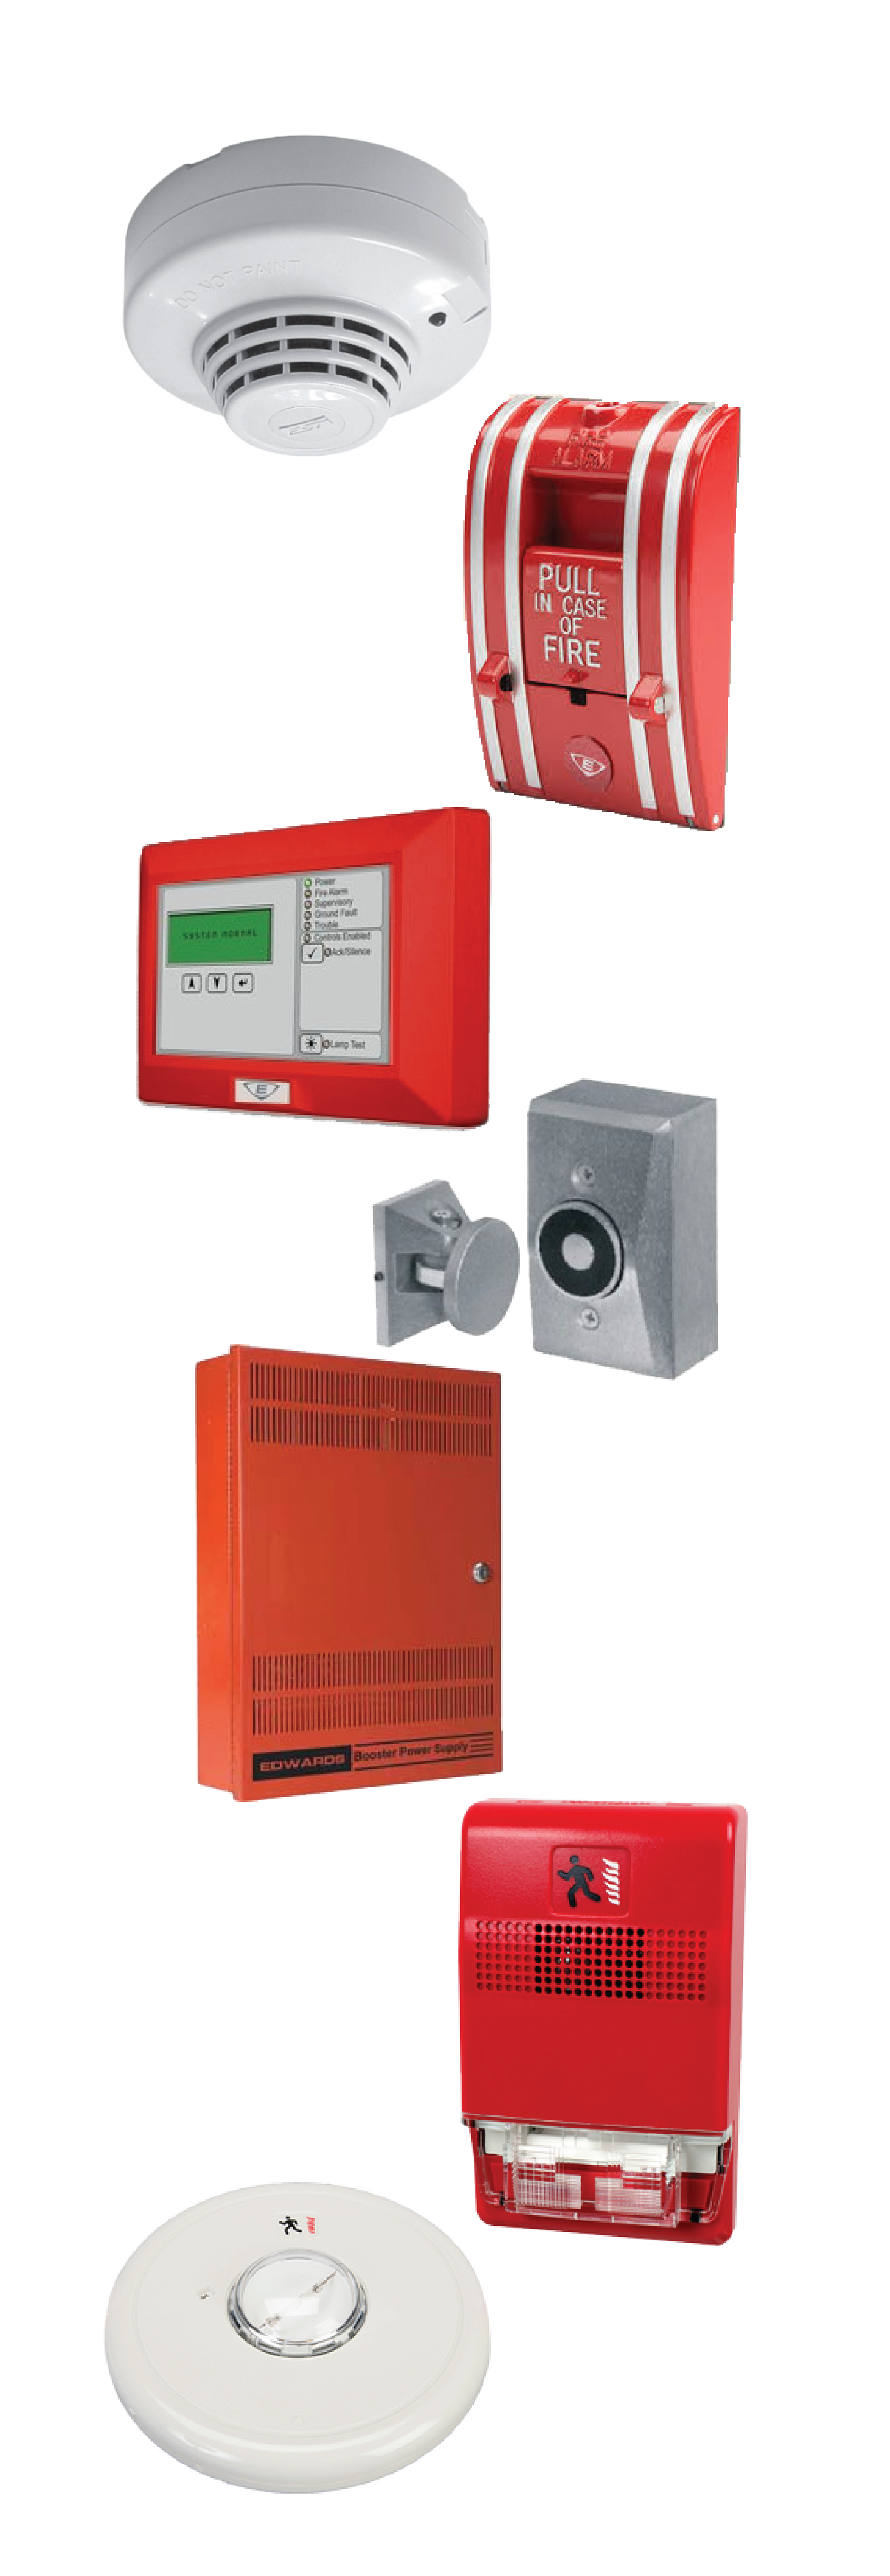 Edwards Signaling Fire Alarm Products